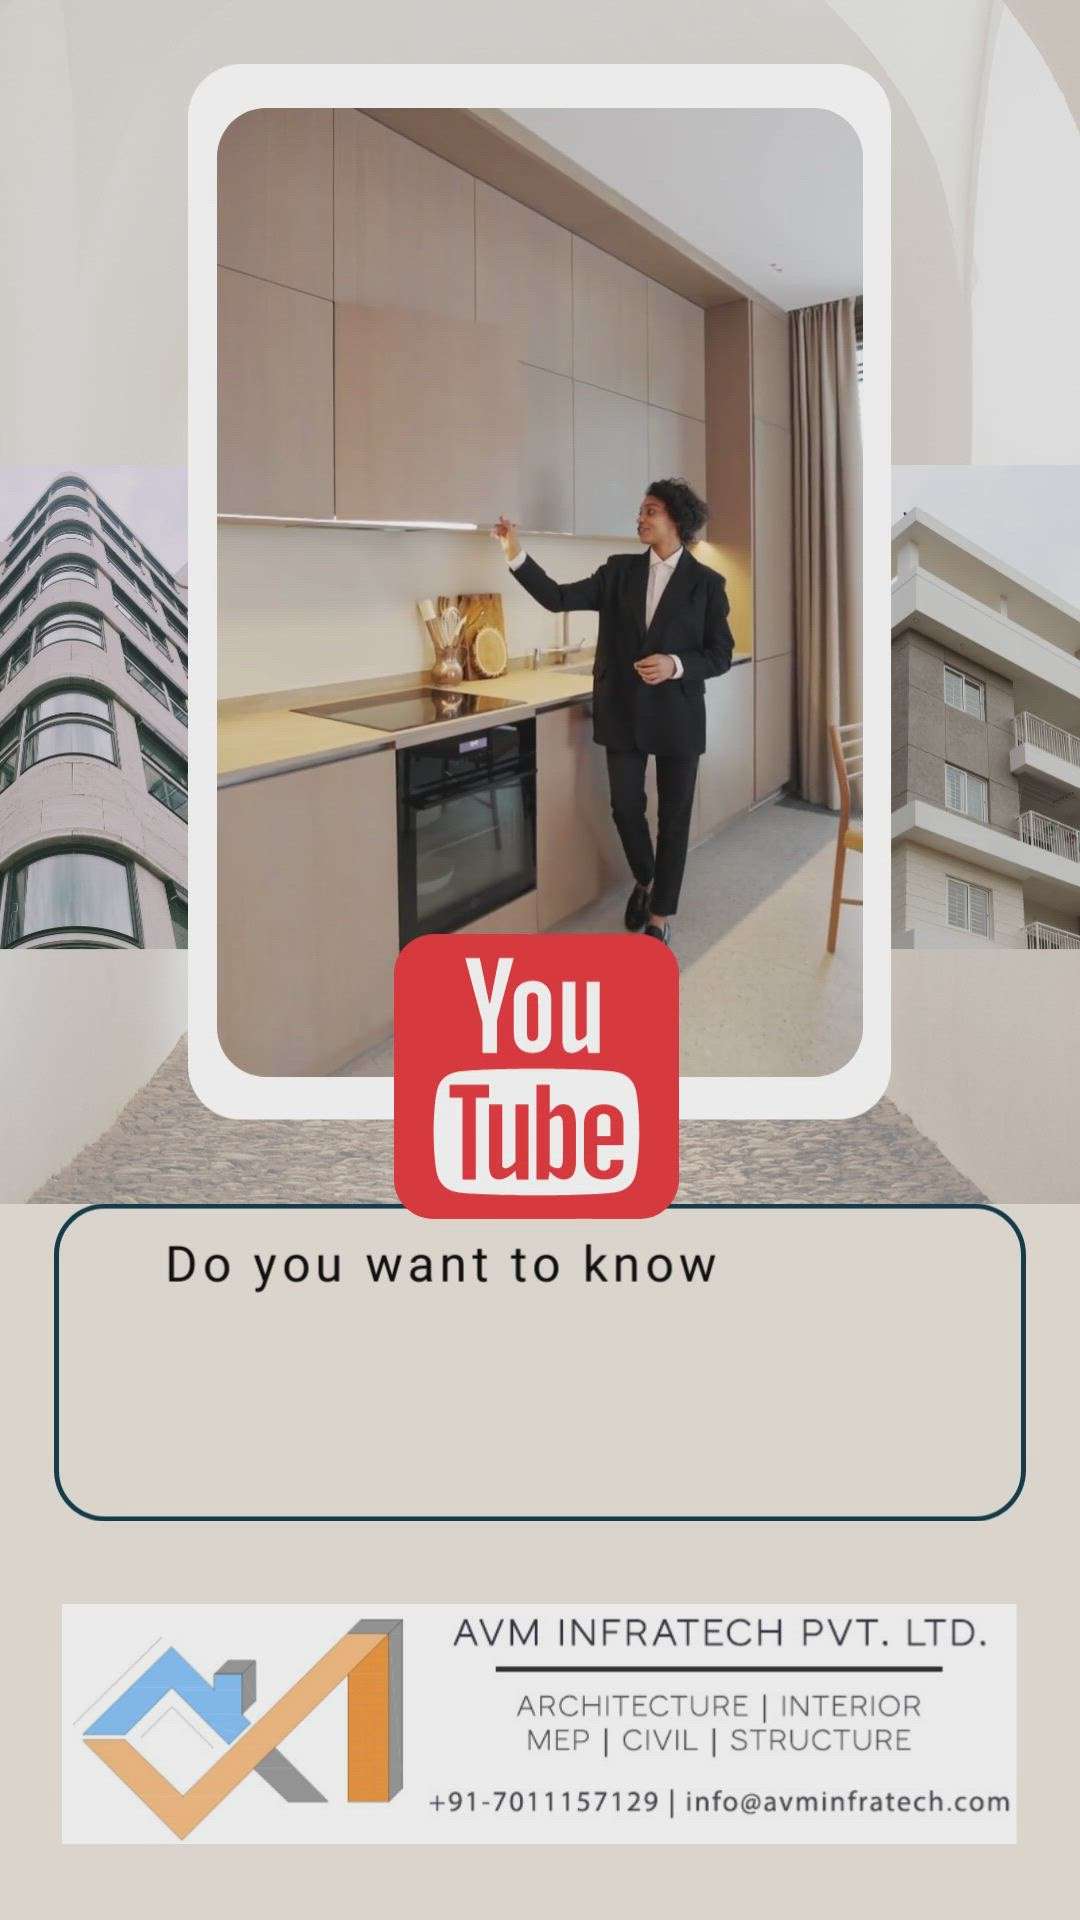 Do you want to know about the designing of Kitchen as per Vastu Shastra? Then check out over full uploaded video on YouTube (Link: https://youtu.be/8yrvaF-iOKQ)


Follow us for more such amazing updates.
.
.
#architect #architecture #interior #interiordesign #kitchen #vastushastra #vastulogy #vastutips #vastutipsforhome #vastuexpert #vastuhome #consultancy #kitchenvastu #vastudesign #vastutip #vasturemedies #kitchendecor #kitchendesign